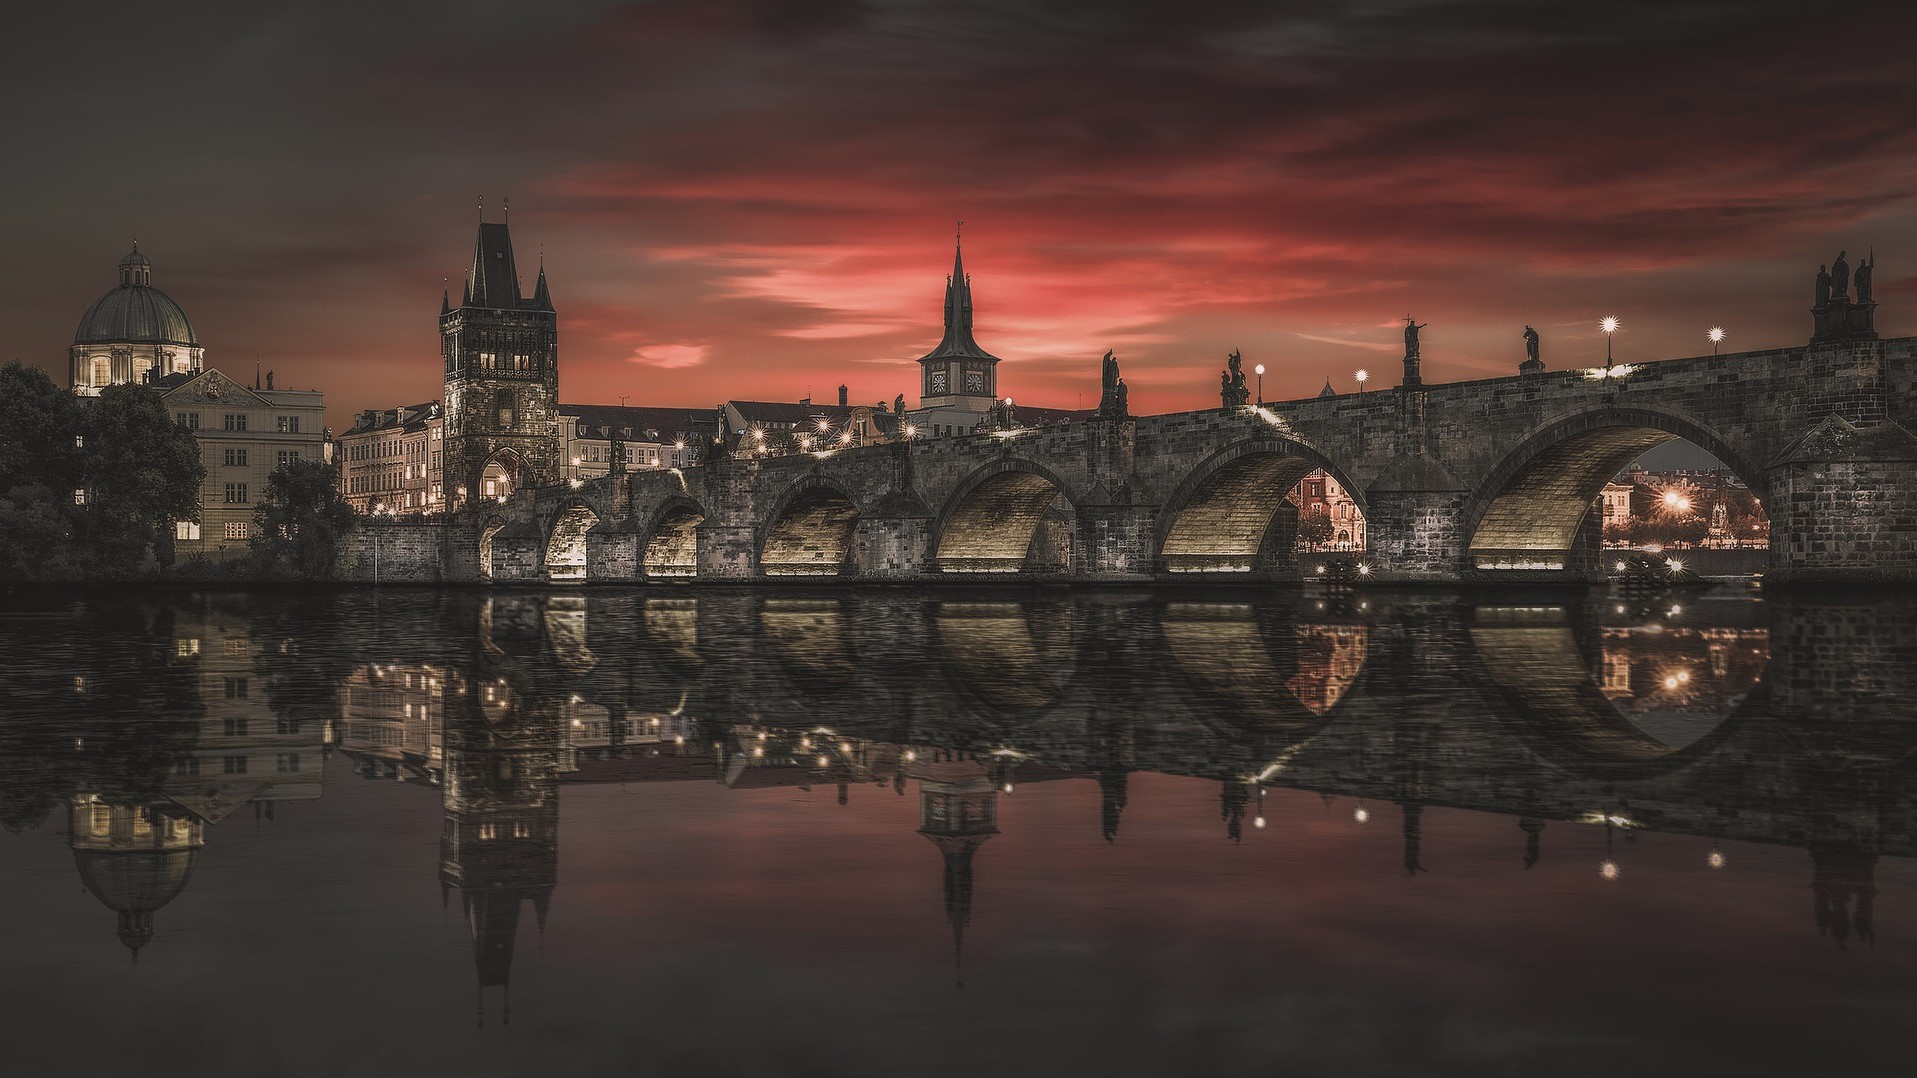 Two vandals were arrested for creating a graffiti on the Charles Bridge